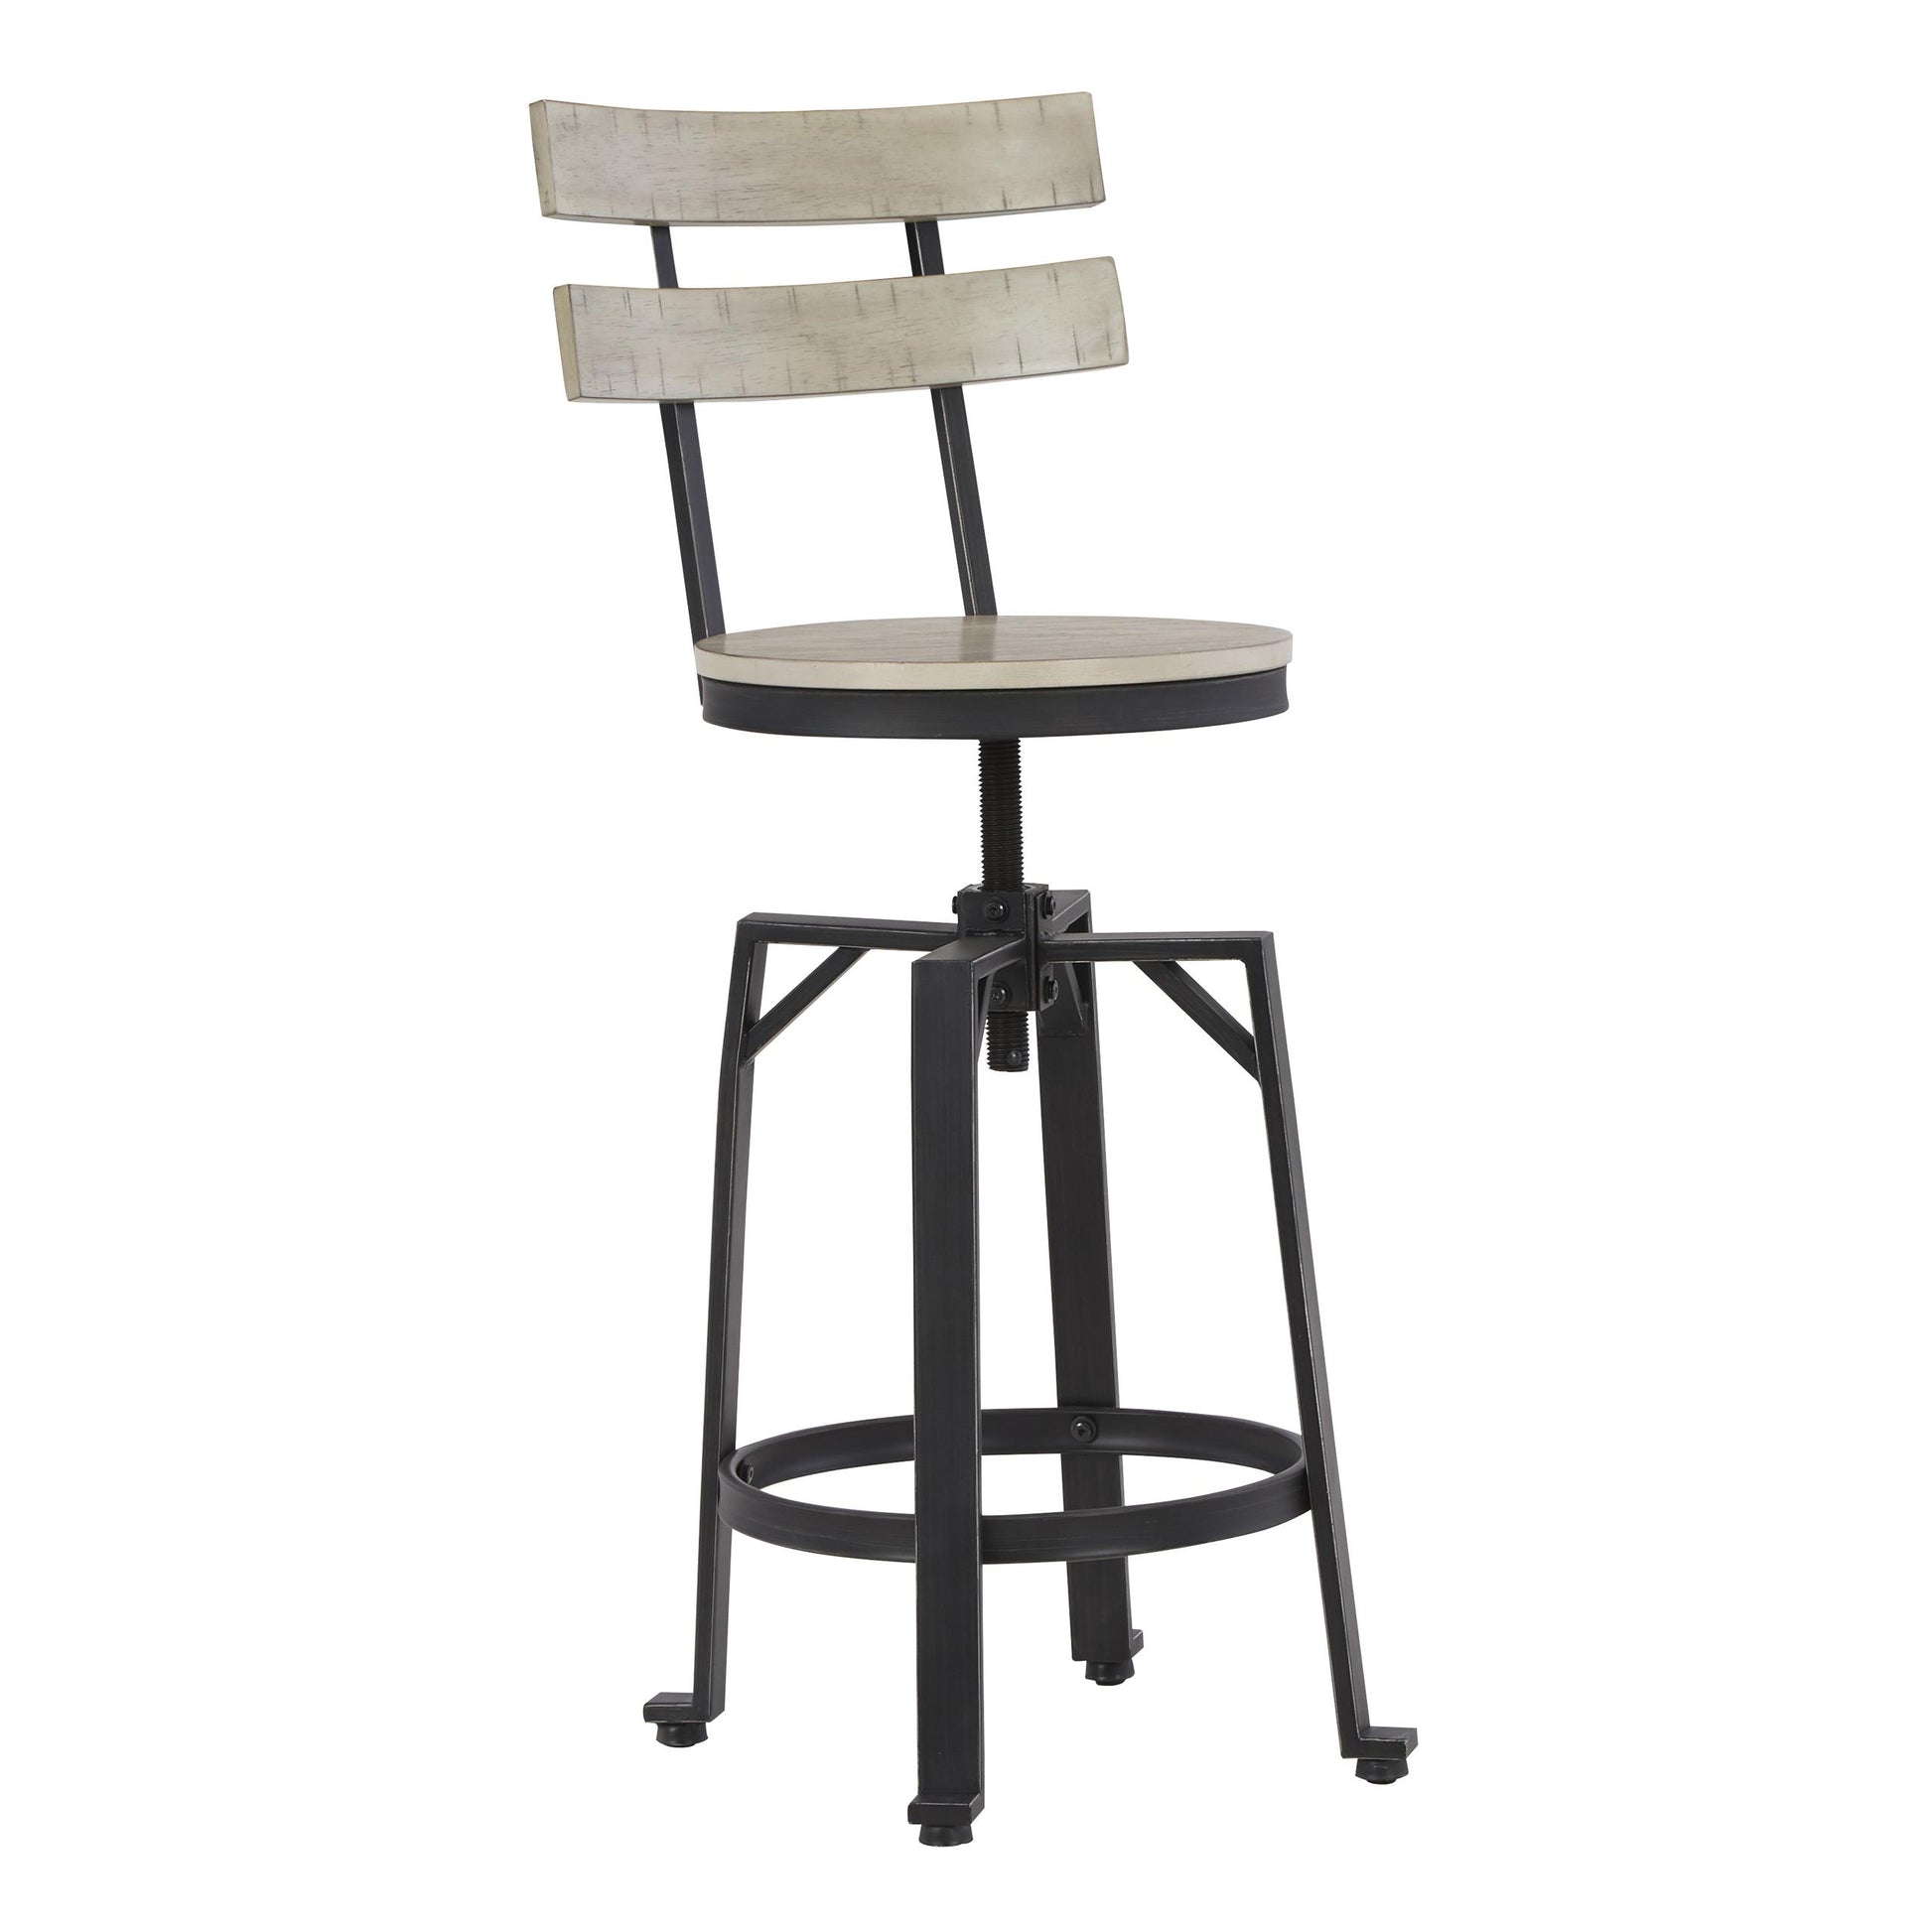 Signature Design by Ashley Karisslyn Adjustable Height Stool D336-124 IMAGE 1